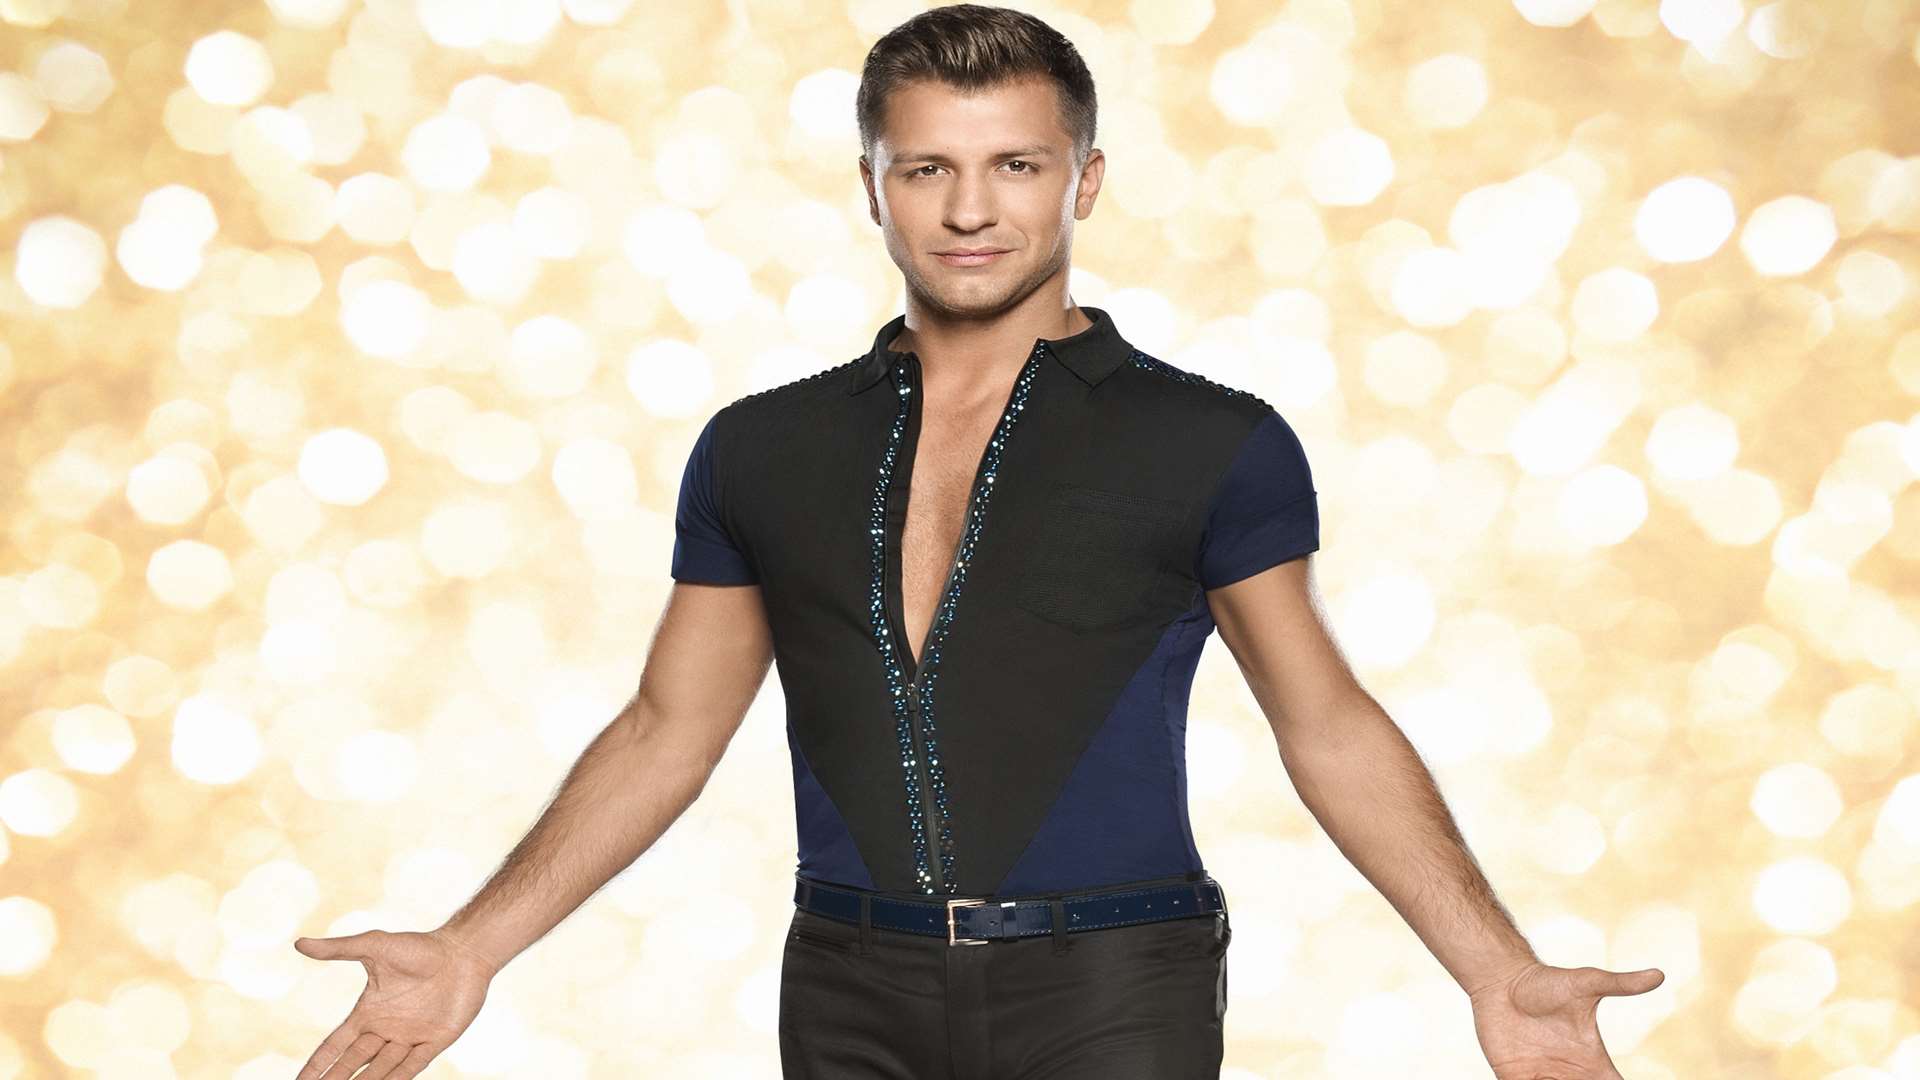 Pasha will be appearing in Kent